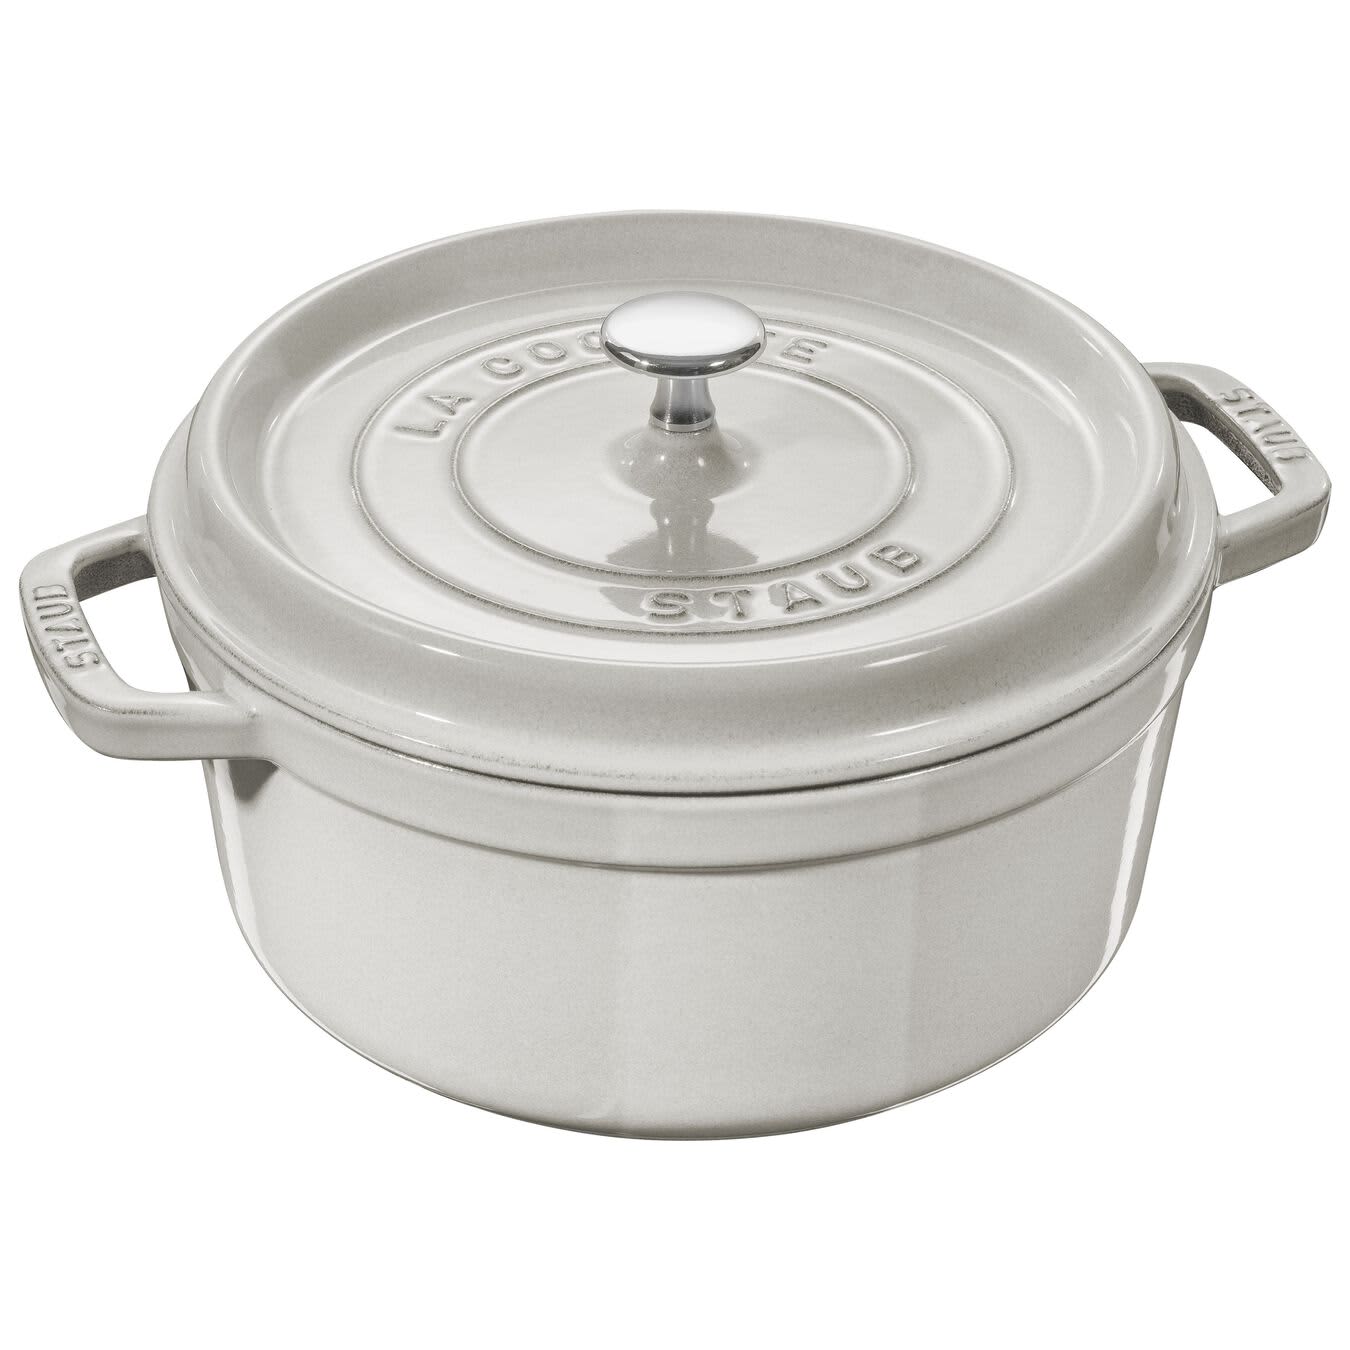 The Essential Guide to Choosing the Right Size Dutch Oven - KÖBACH